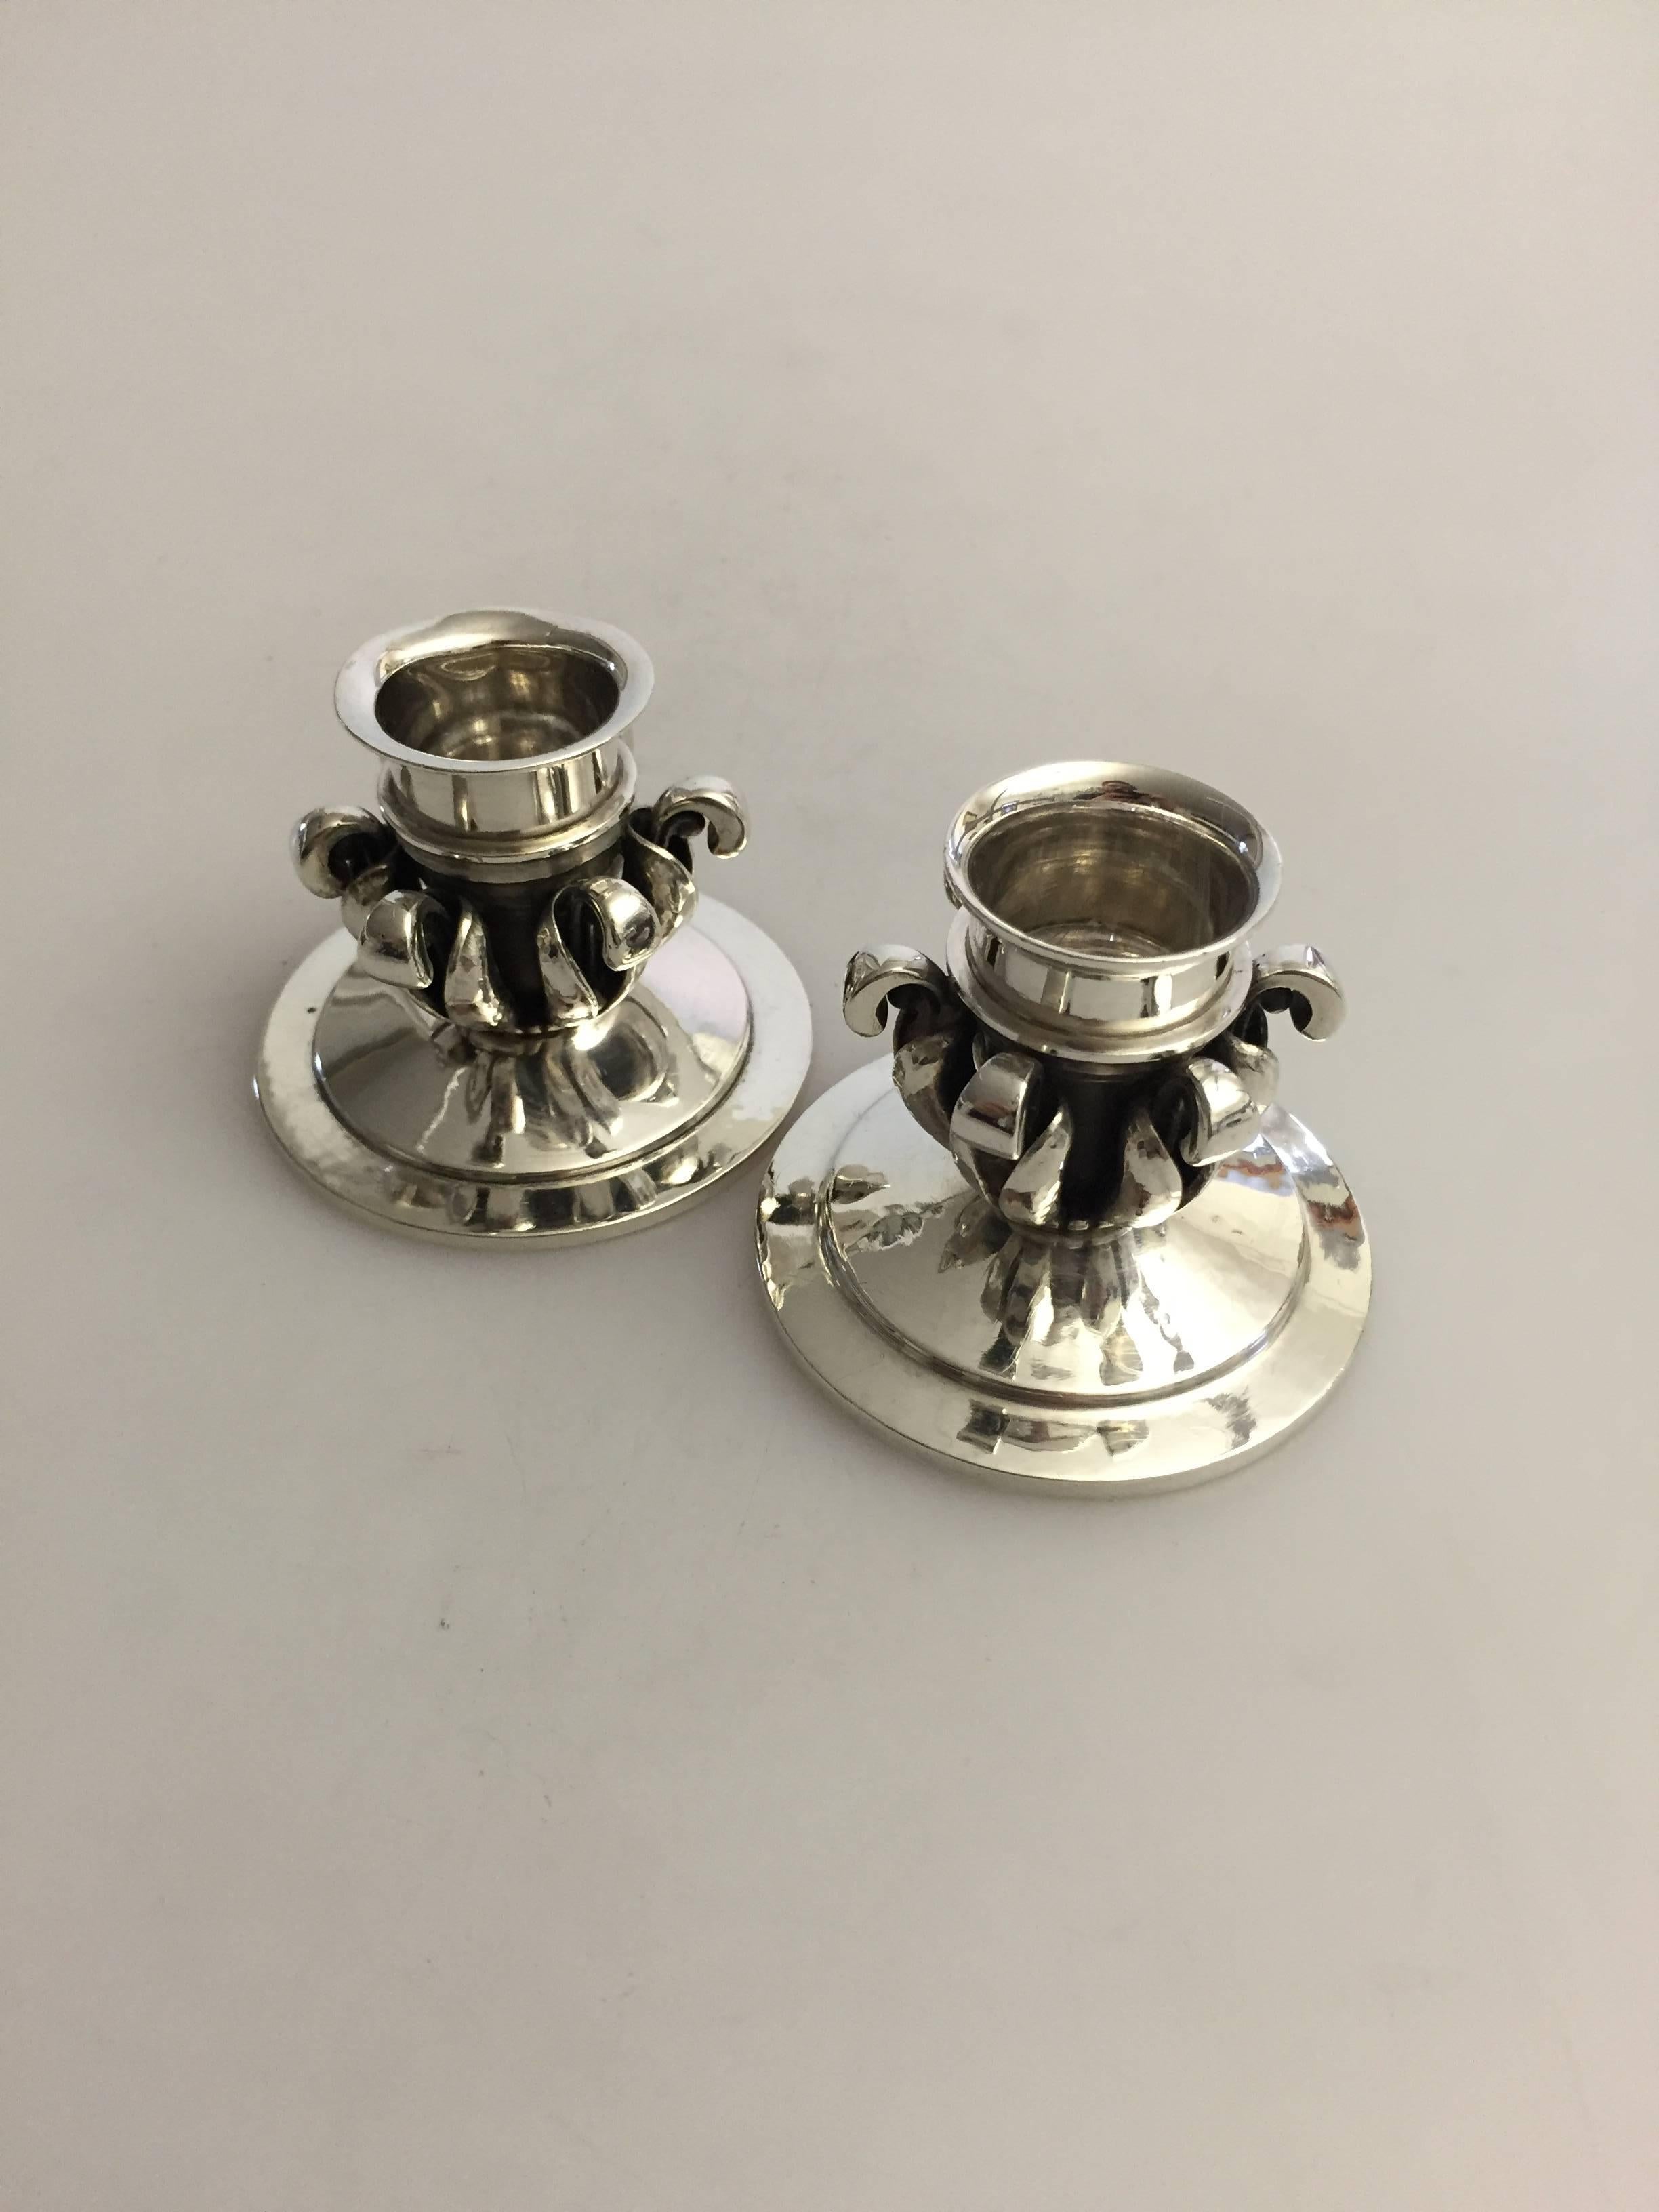 Georg Jensen pair of sterling silver candlesticks #598. There is a tiny height difference between the two, but it is hard to see with the visible eye. 

Measures 5 cm high and 6.2 cm in diameter.